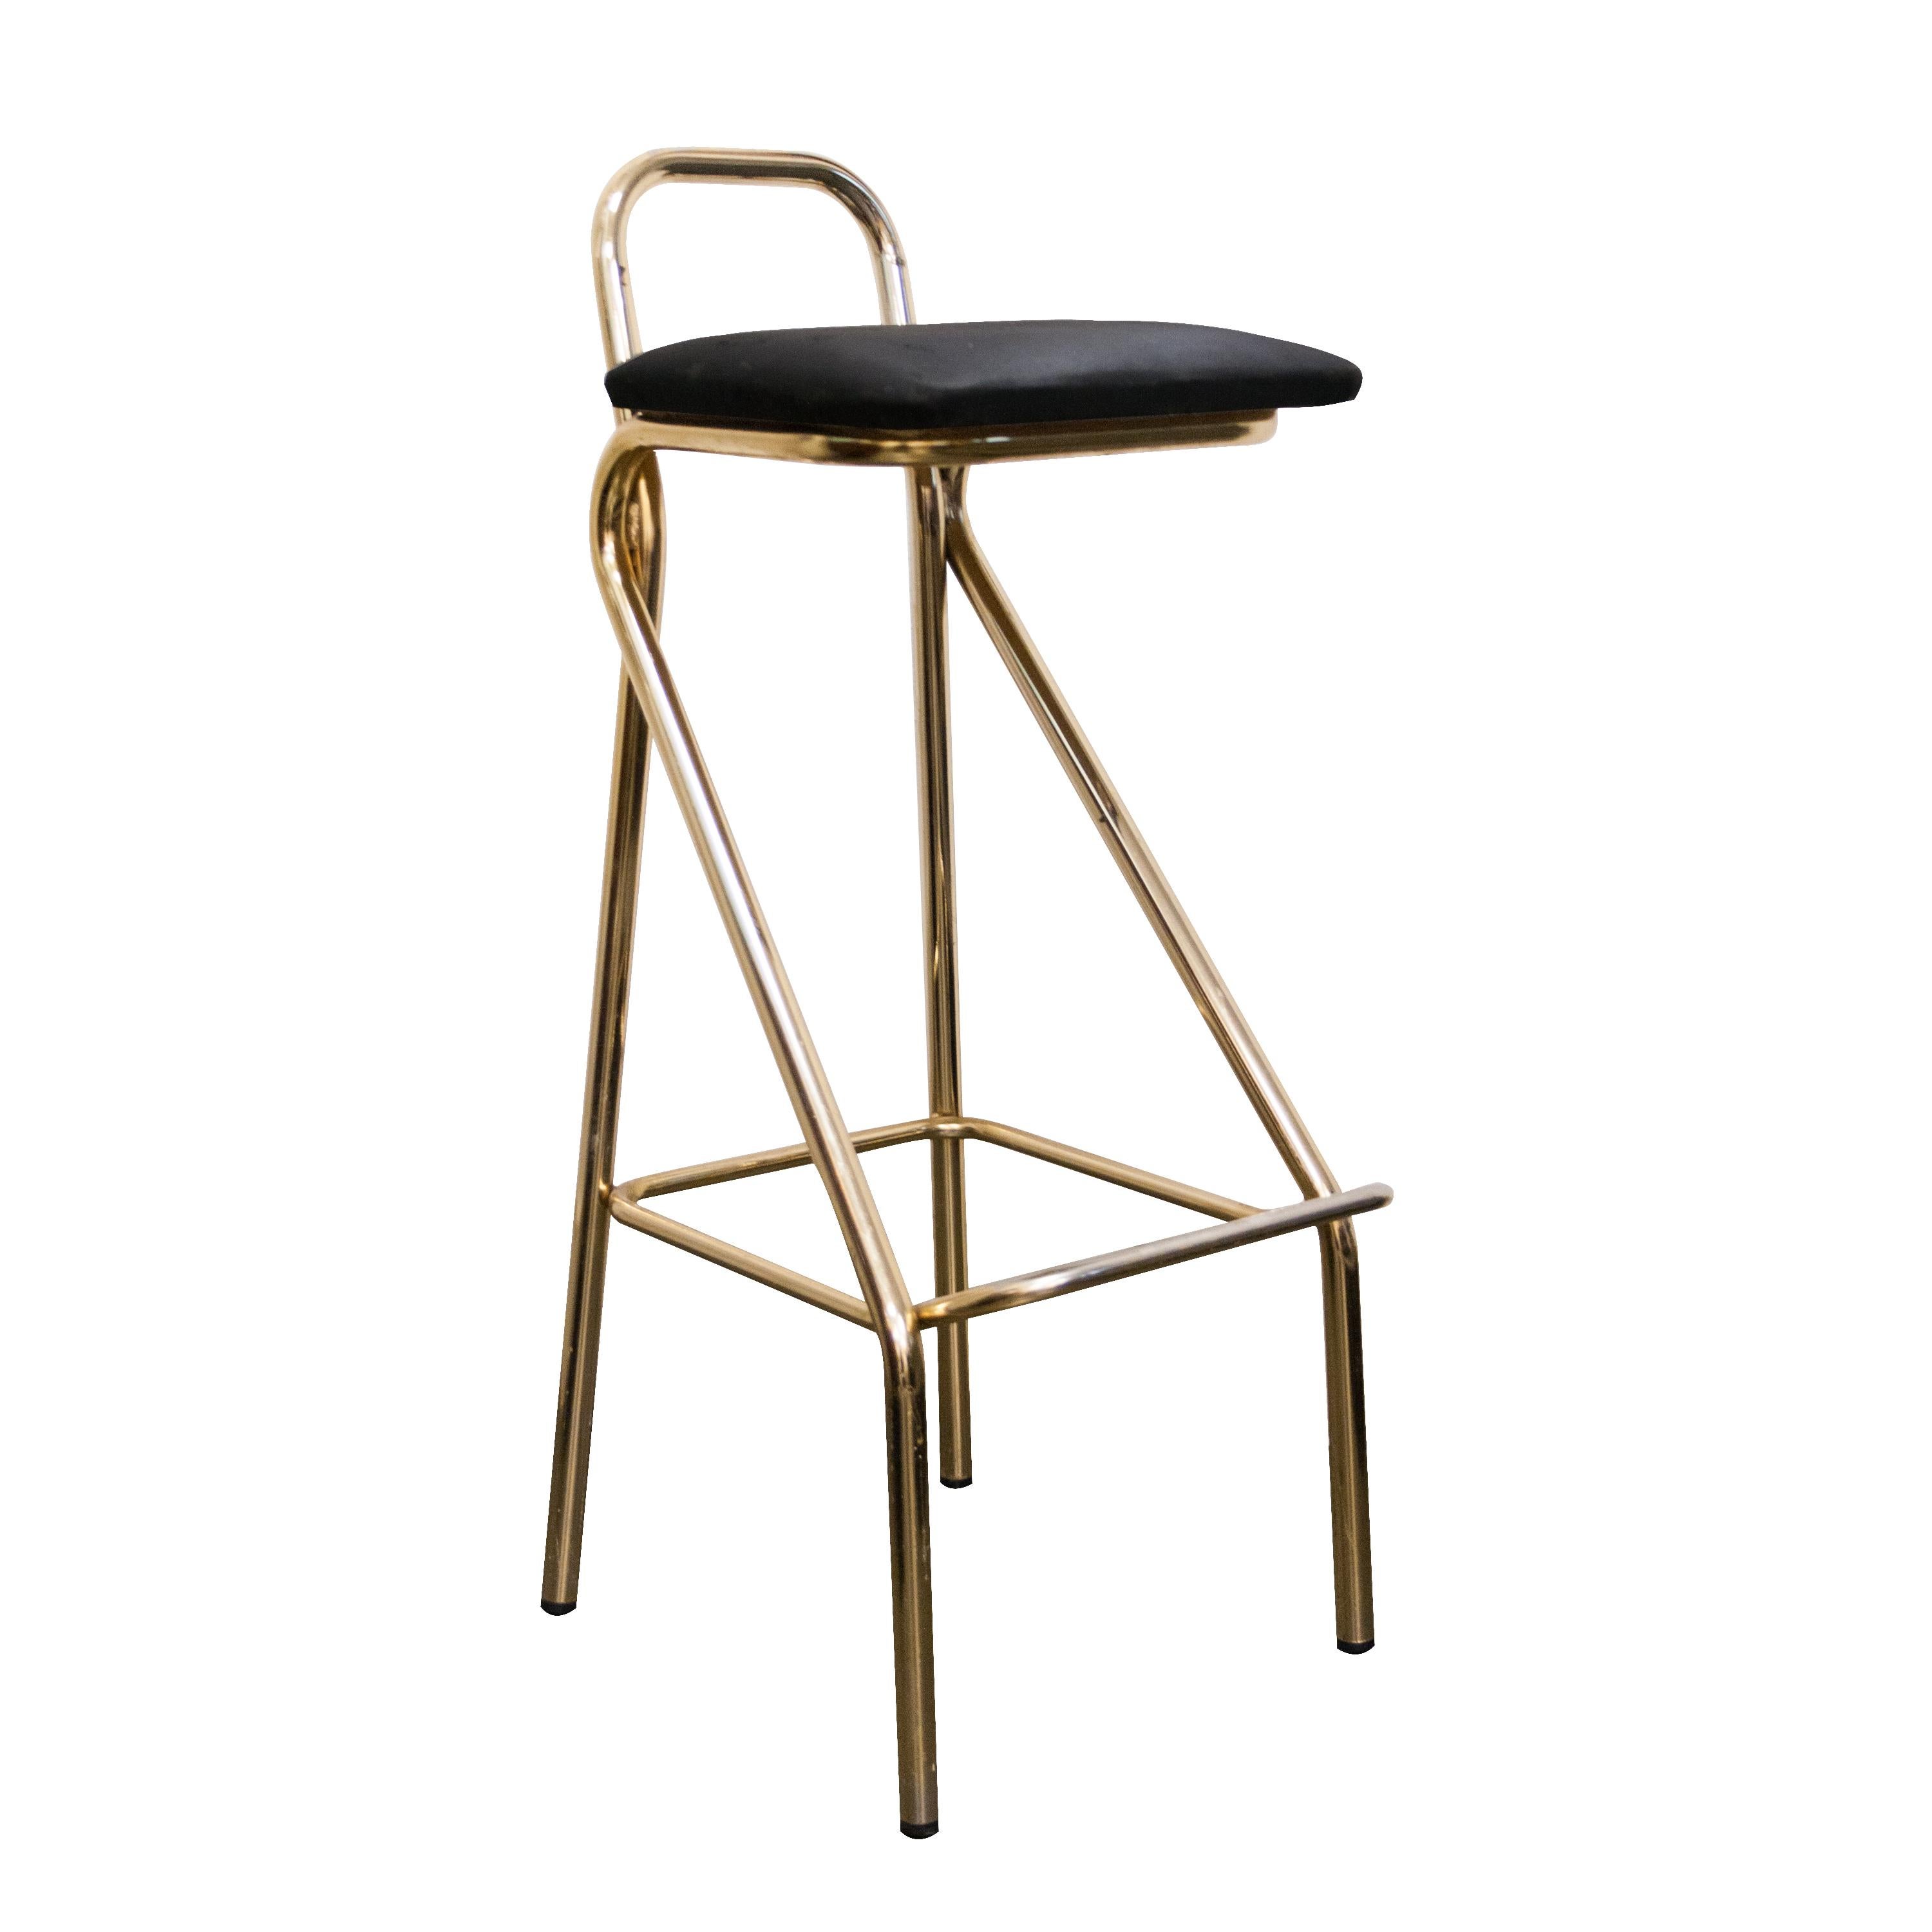 Mid-Century Modern Mid-Century Golden Chrome Metal and Leather Bar Pair of Stools, Italy, 1960 For Sale